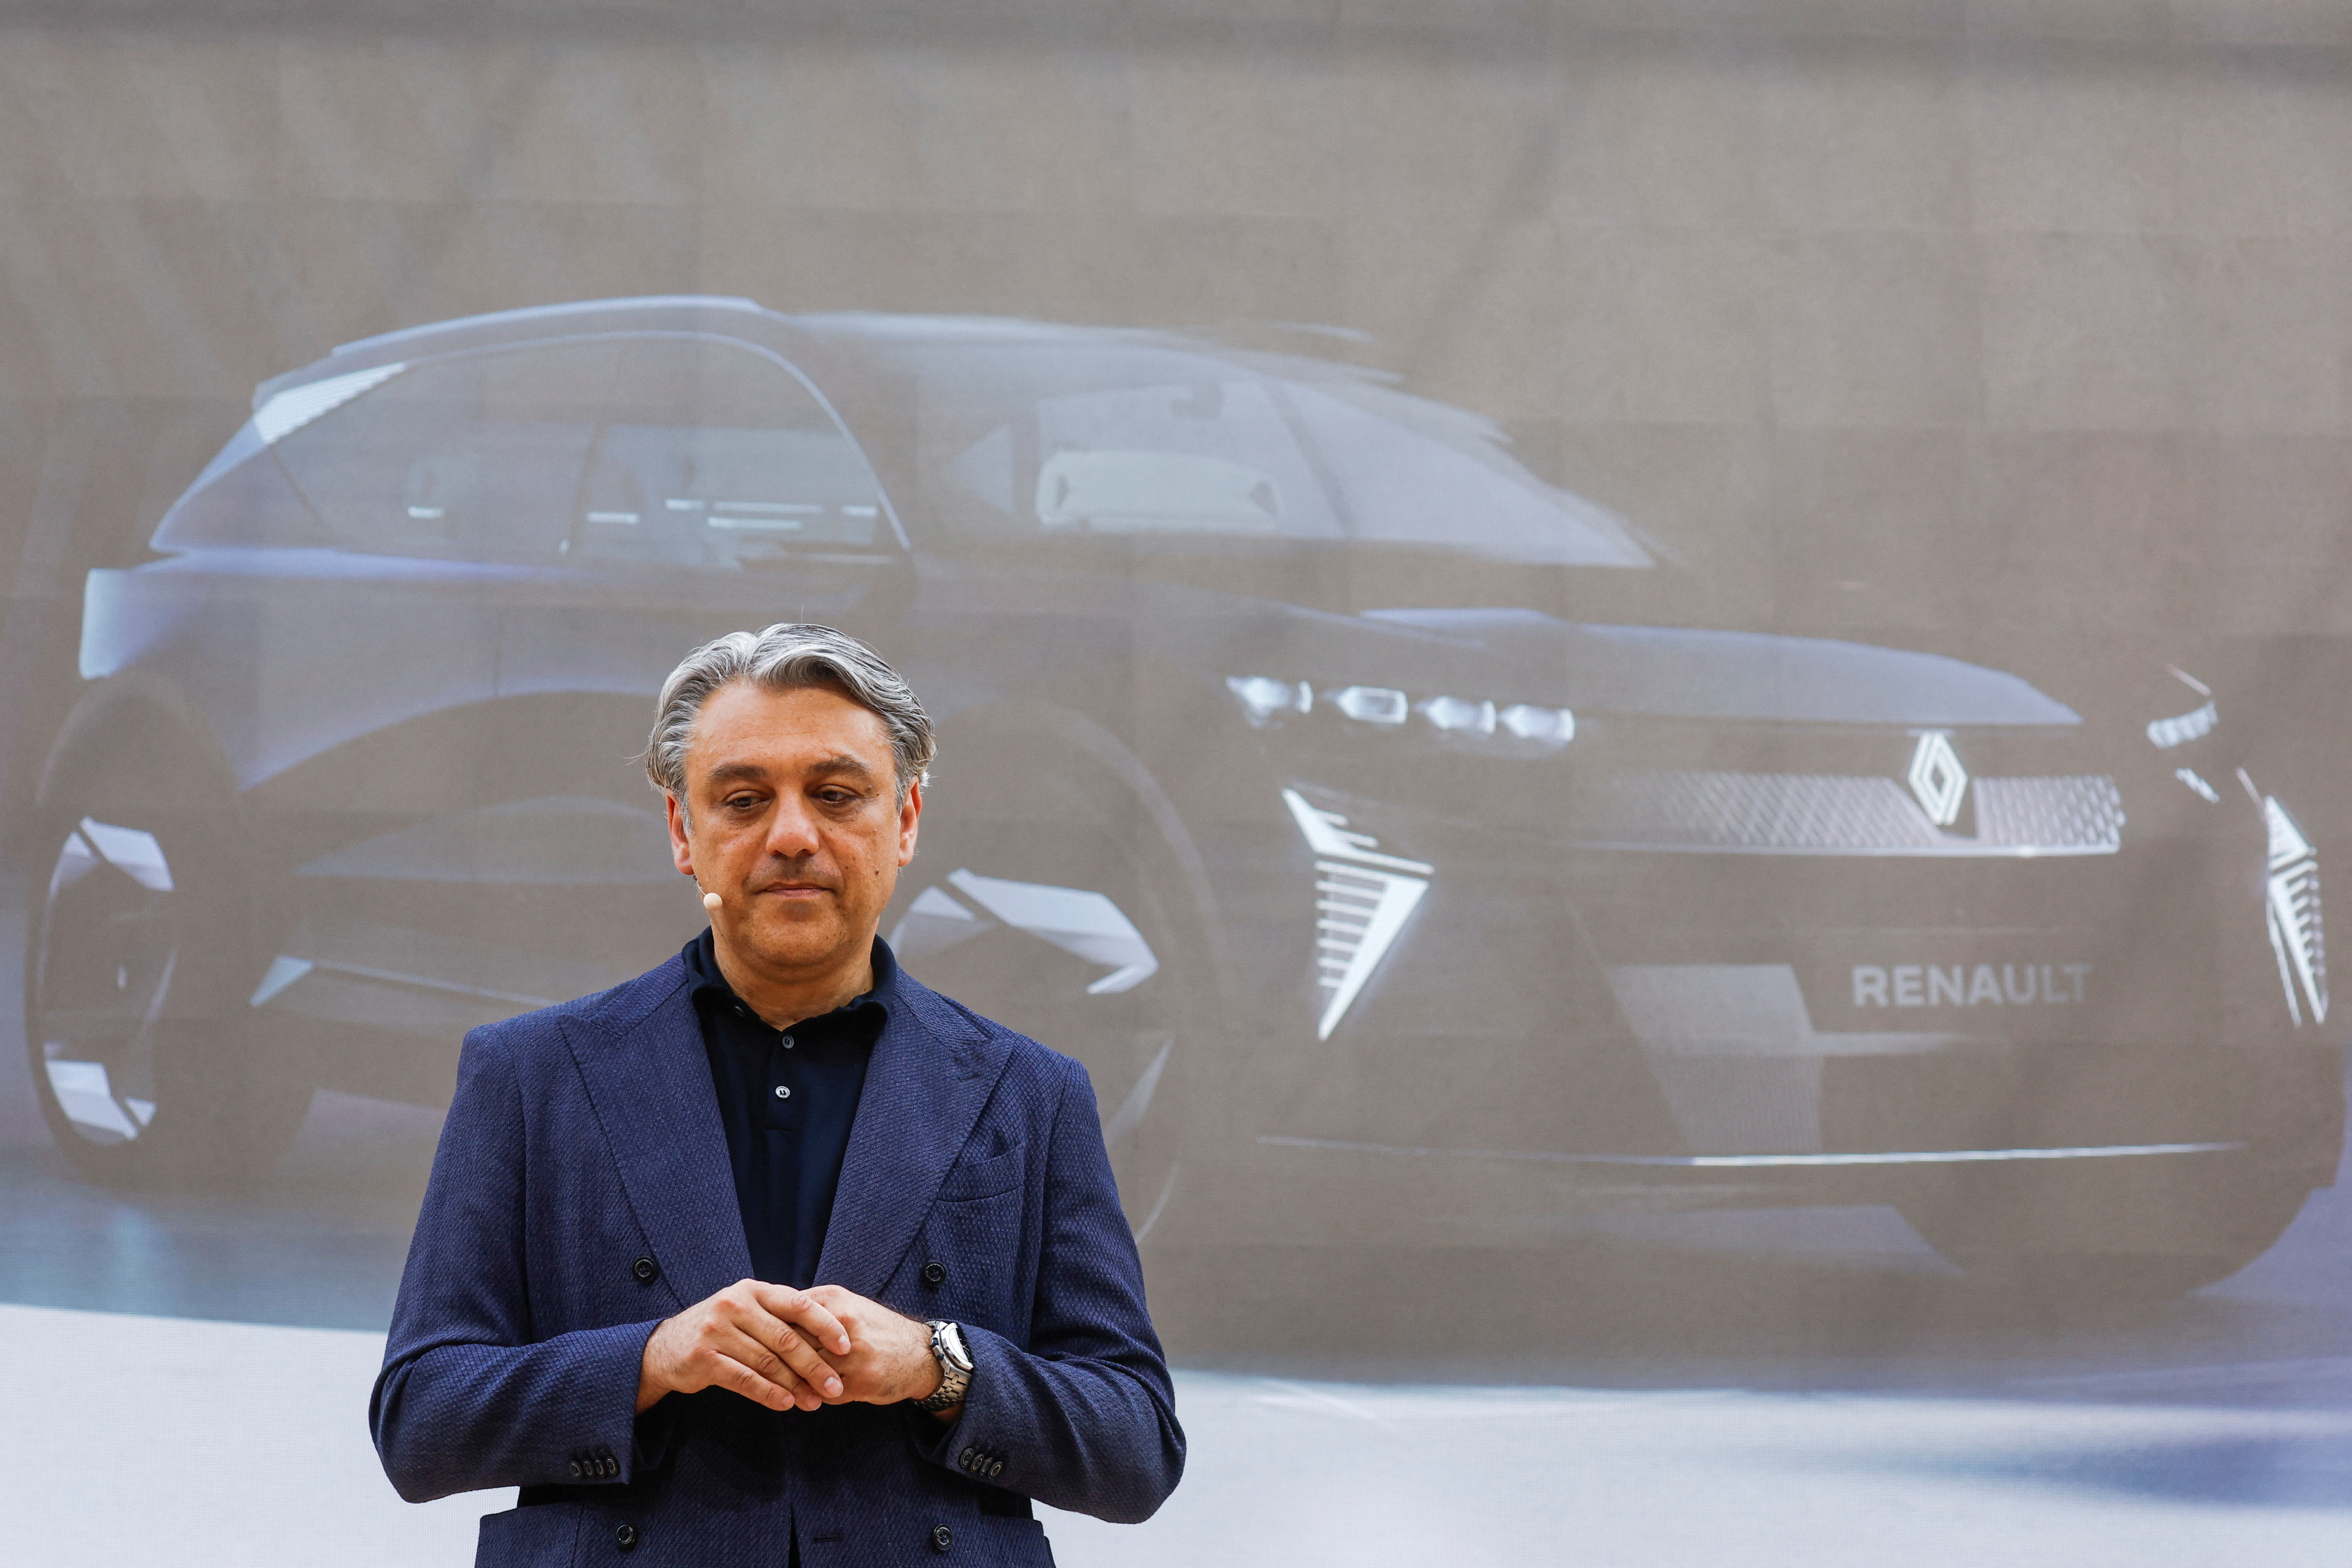 Renault's new hydrogen fuel cell-powered vehicle in Paris